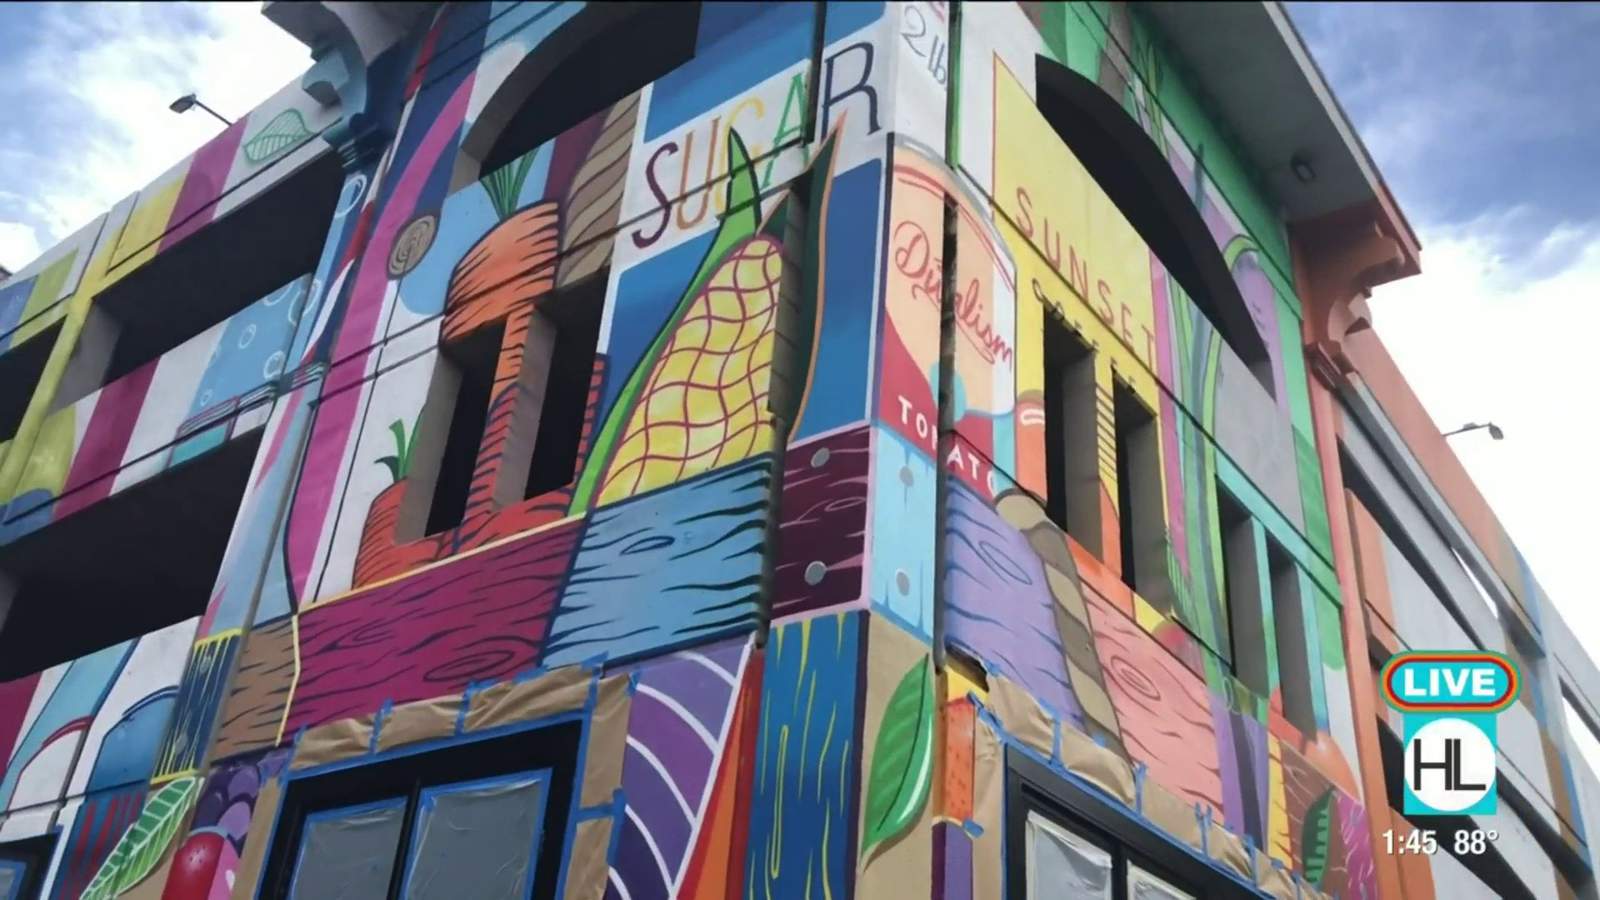 New website helps people find and enjoy the many wonderful murals throughout Houston | HOUSTON LIFE | KPRC 2